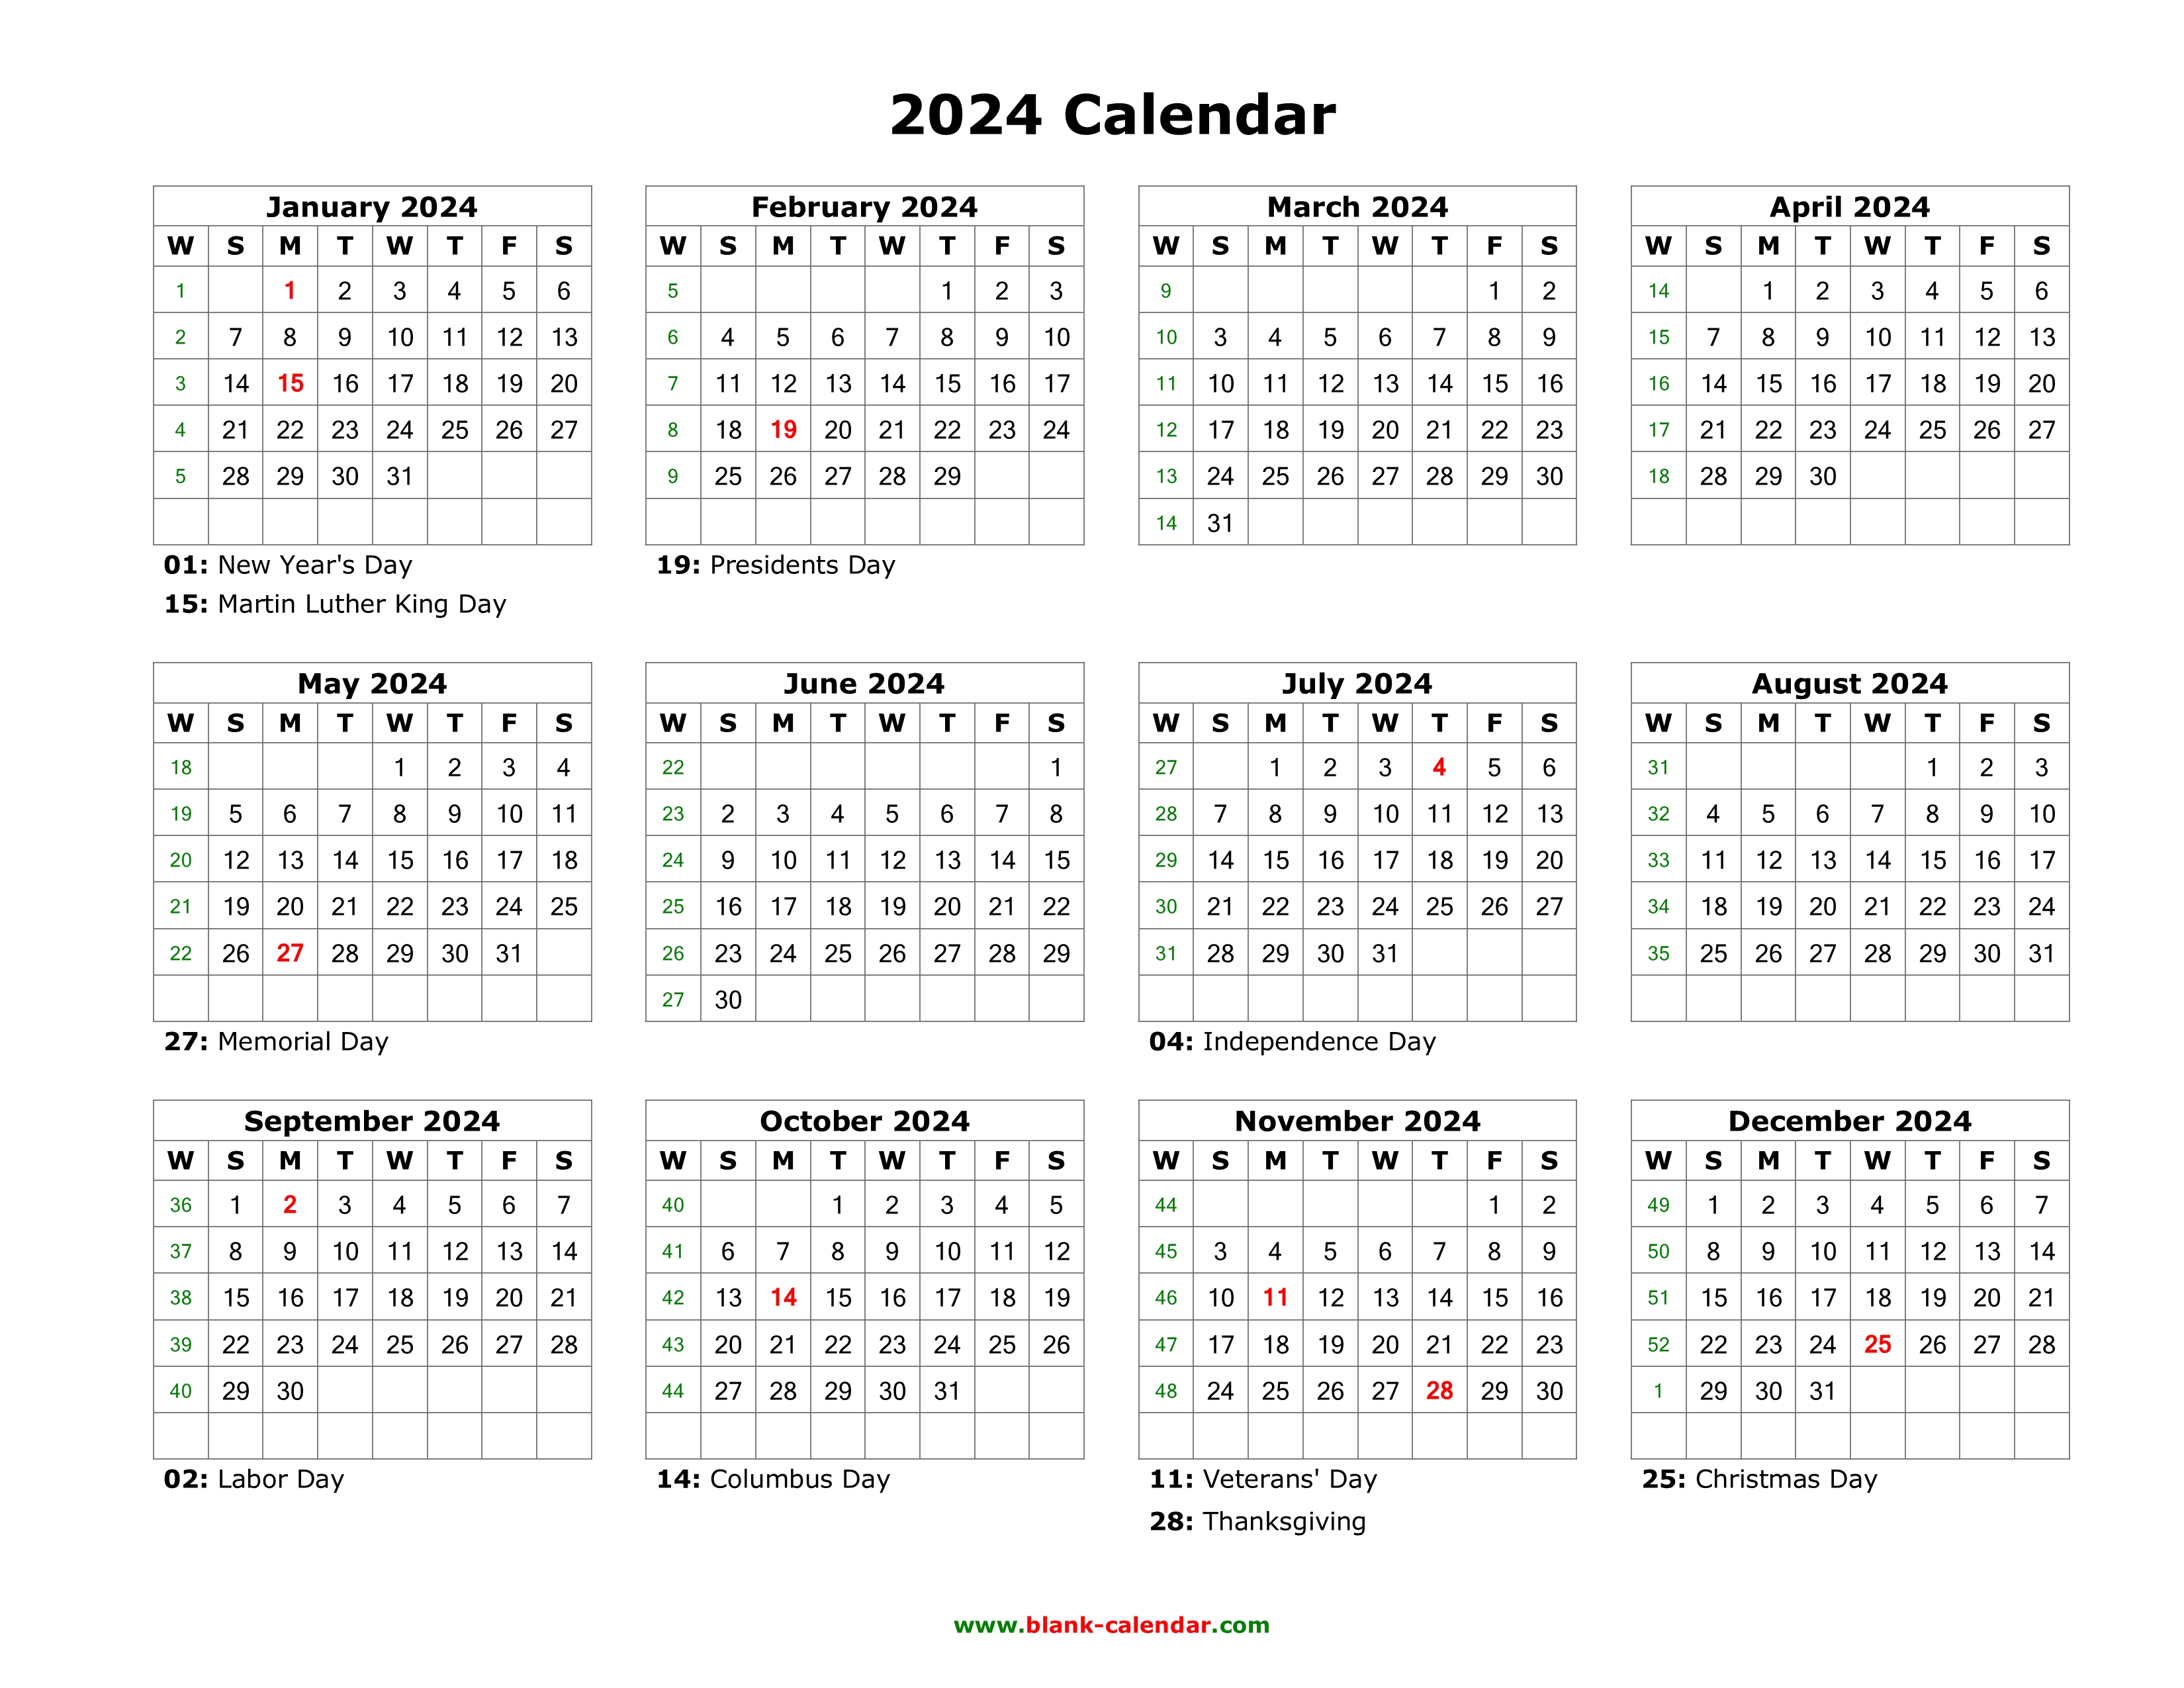 Download Blank Calendar 2024 With US Holidays 12 Months On One Page 